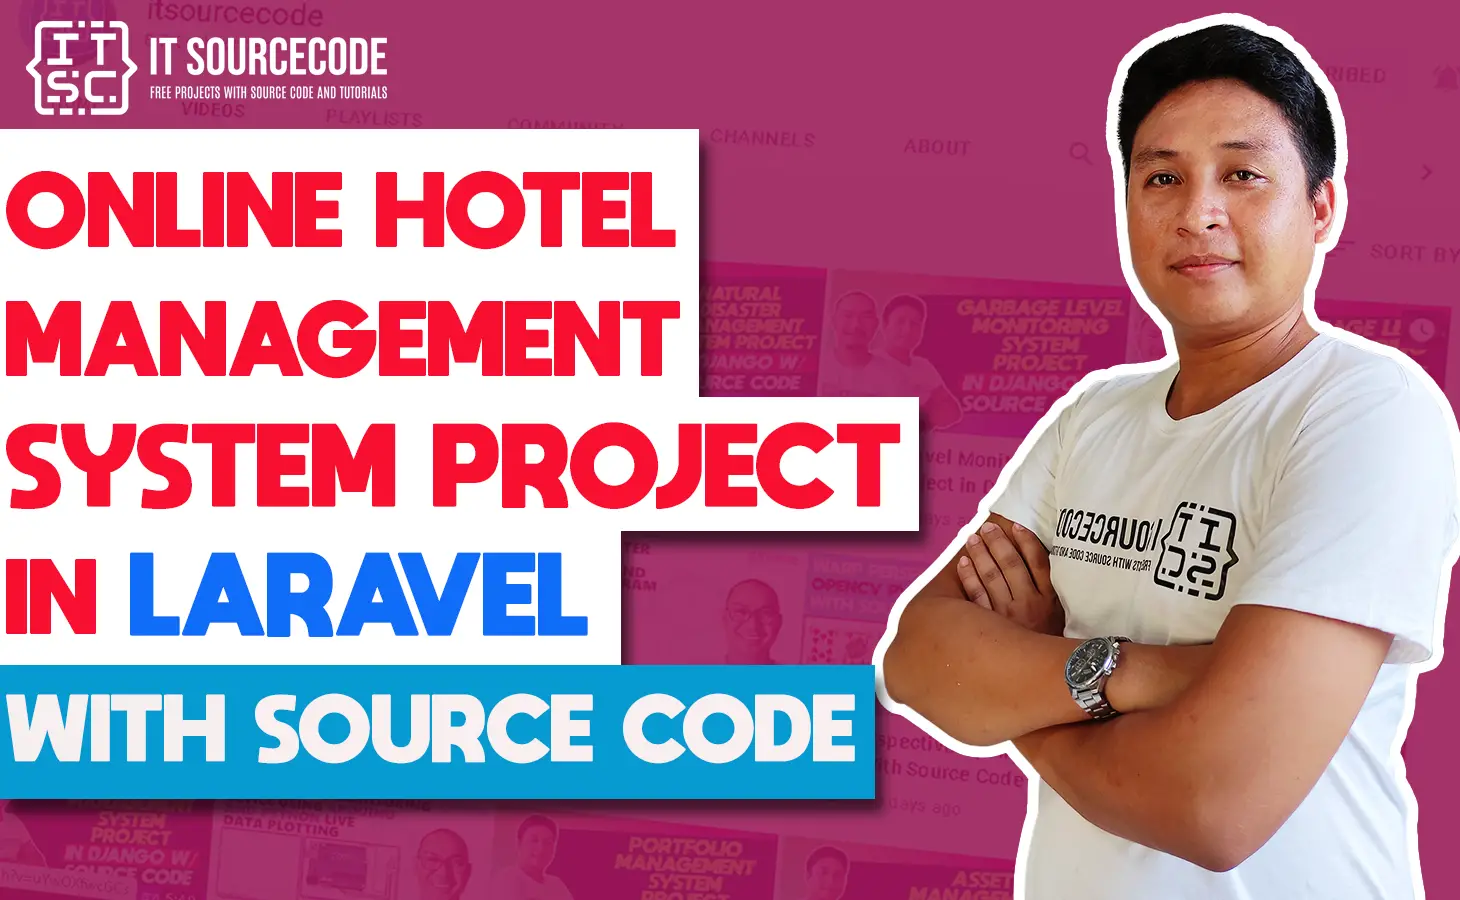 Online Hospital Management System Project in Laravel with Source Code